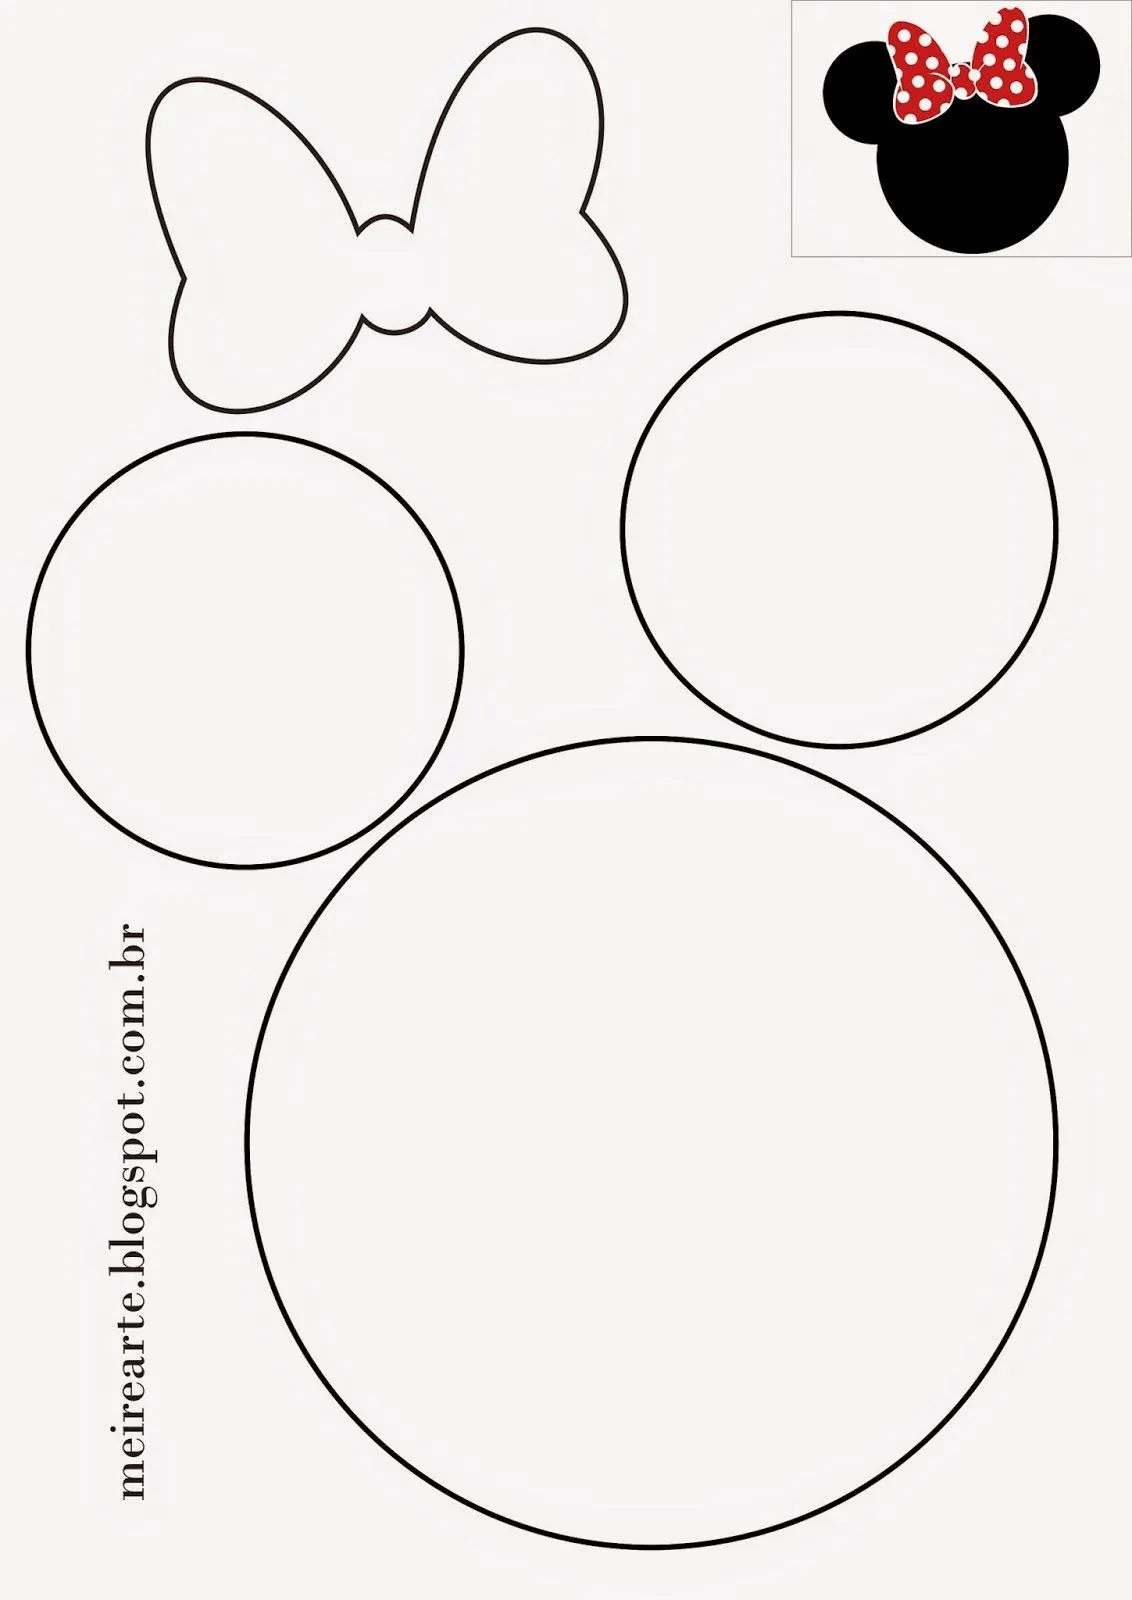 Printable Minnie Mouse Outline | Style | Pinterest | Mice and ...